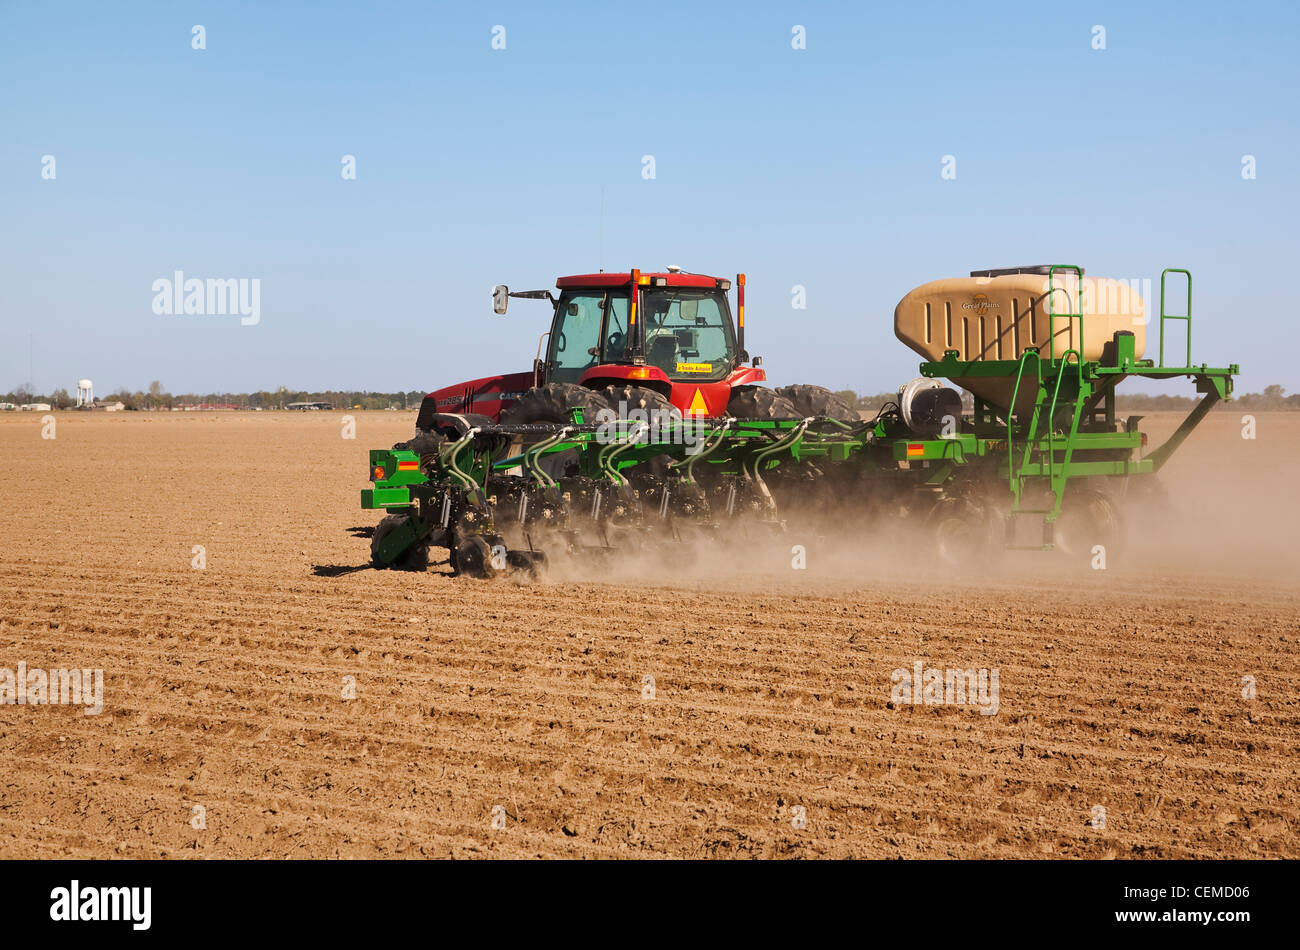 Agriculture - Case IH tractor and Great Plains 40-foot twin row planter with bulk seed hopper plants grain corn / Arkansas, USA. Stock Photo